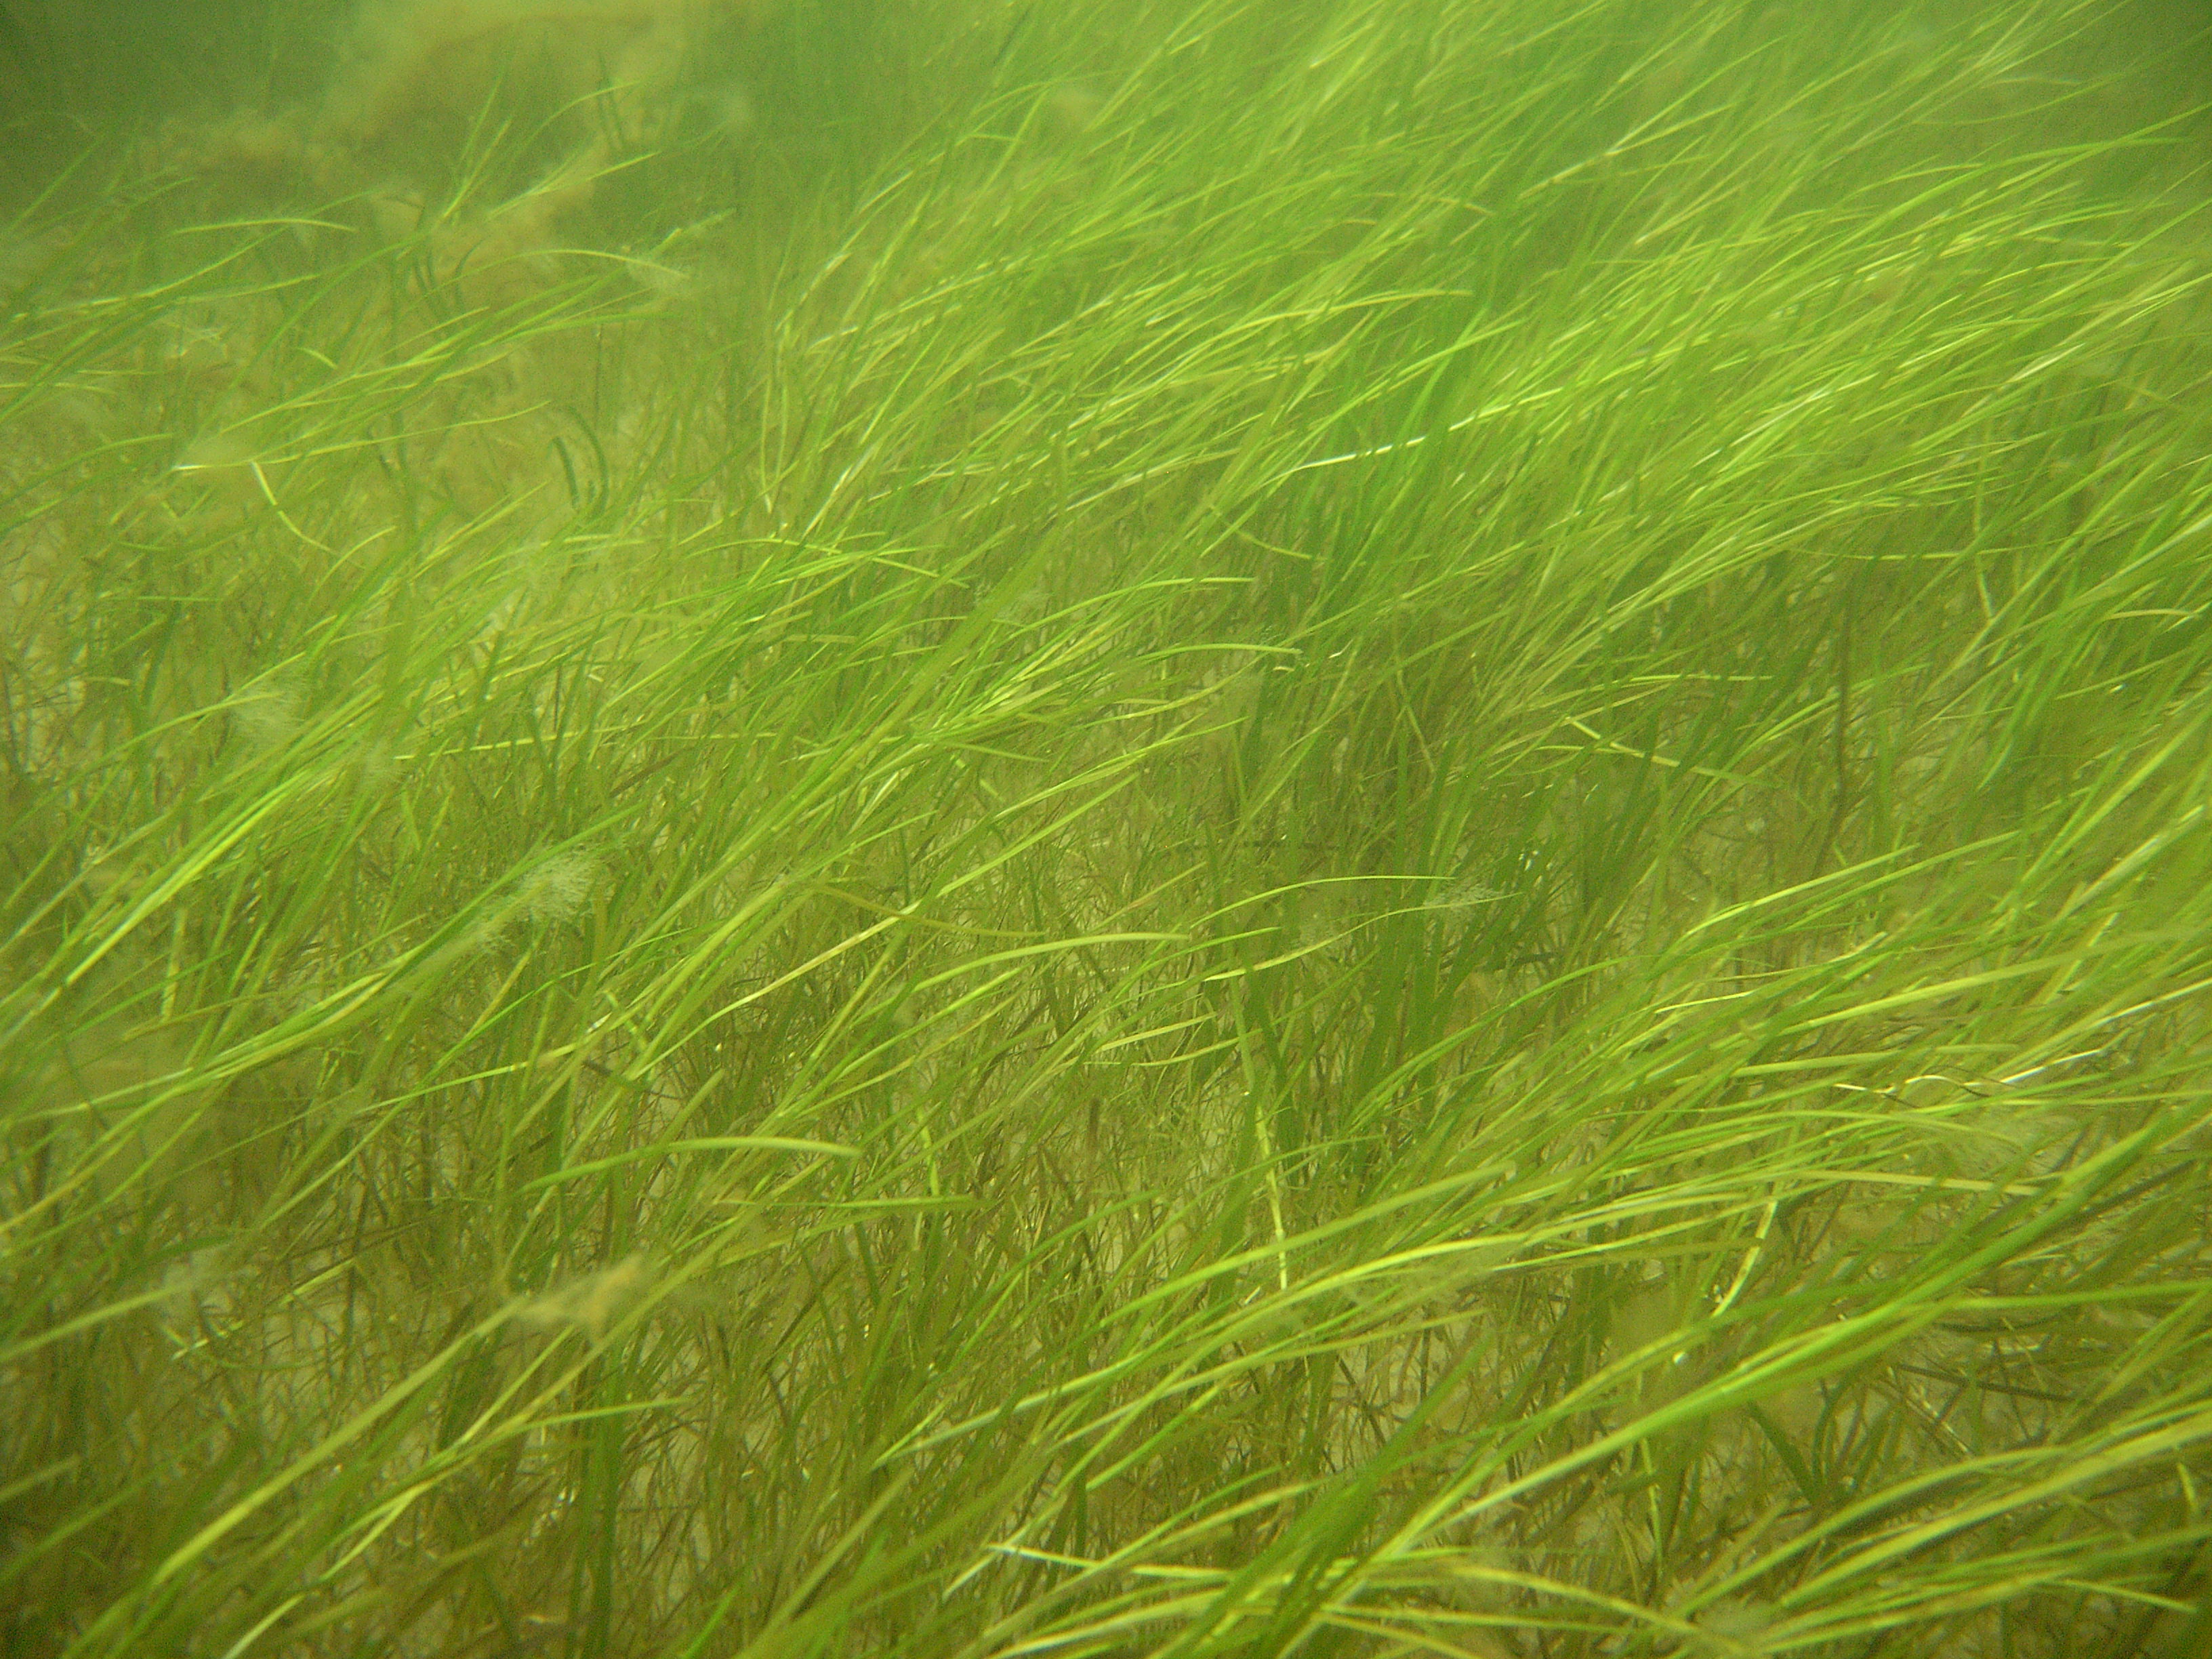 In the picture you can see a meadow submarine in the Baltic Sea, consisting of green grass and seaweed 